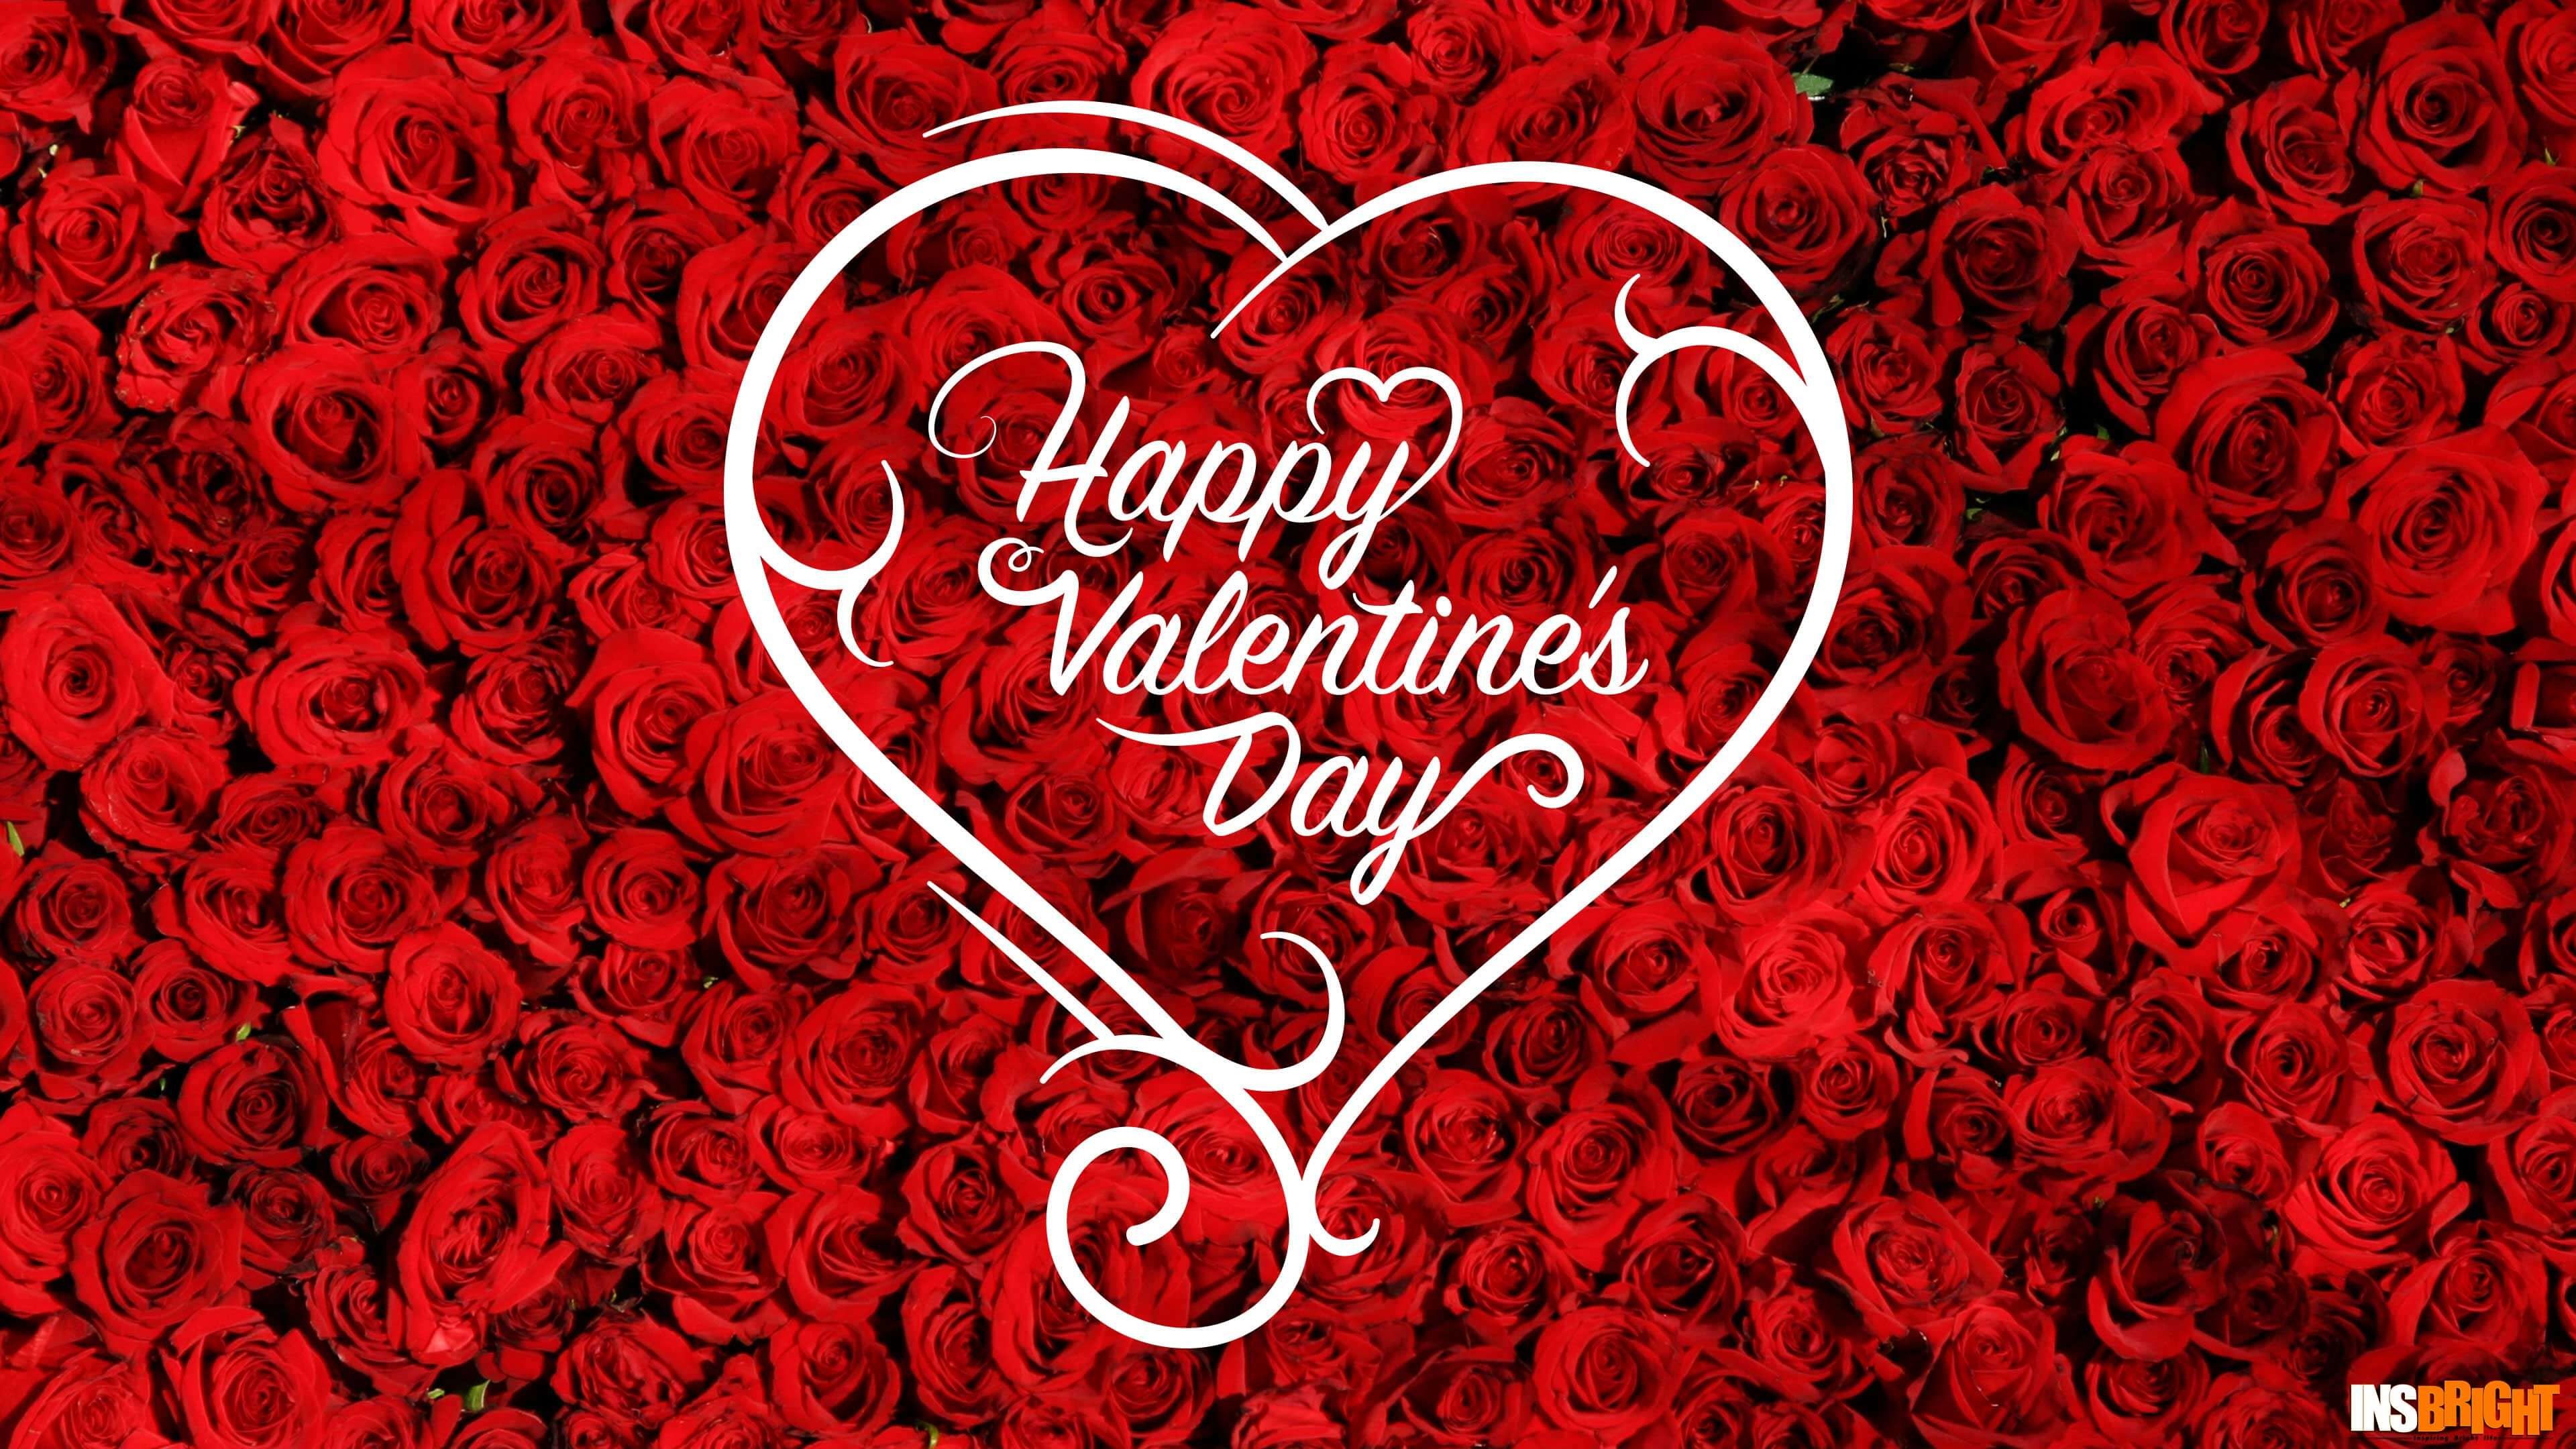 3840x2160 happy valentines day images free